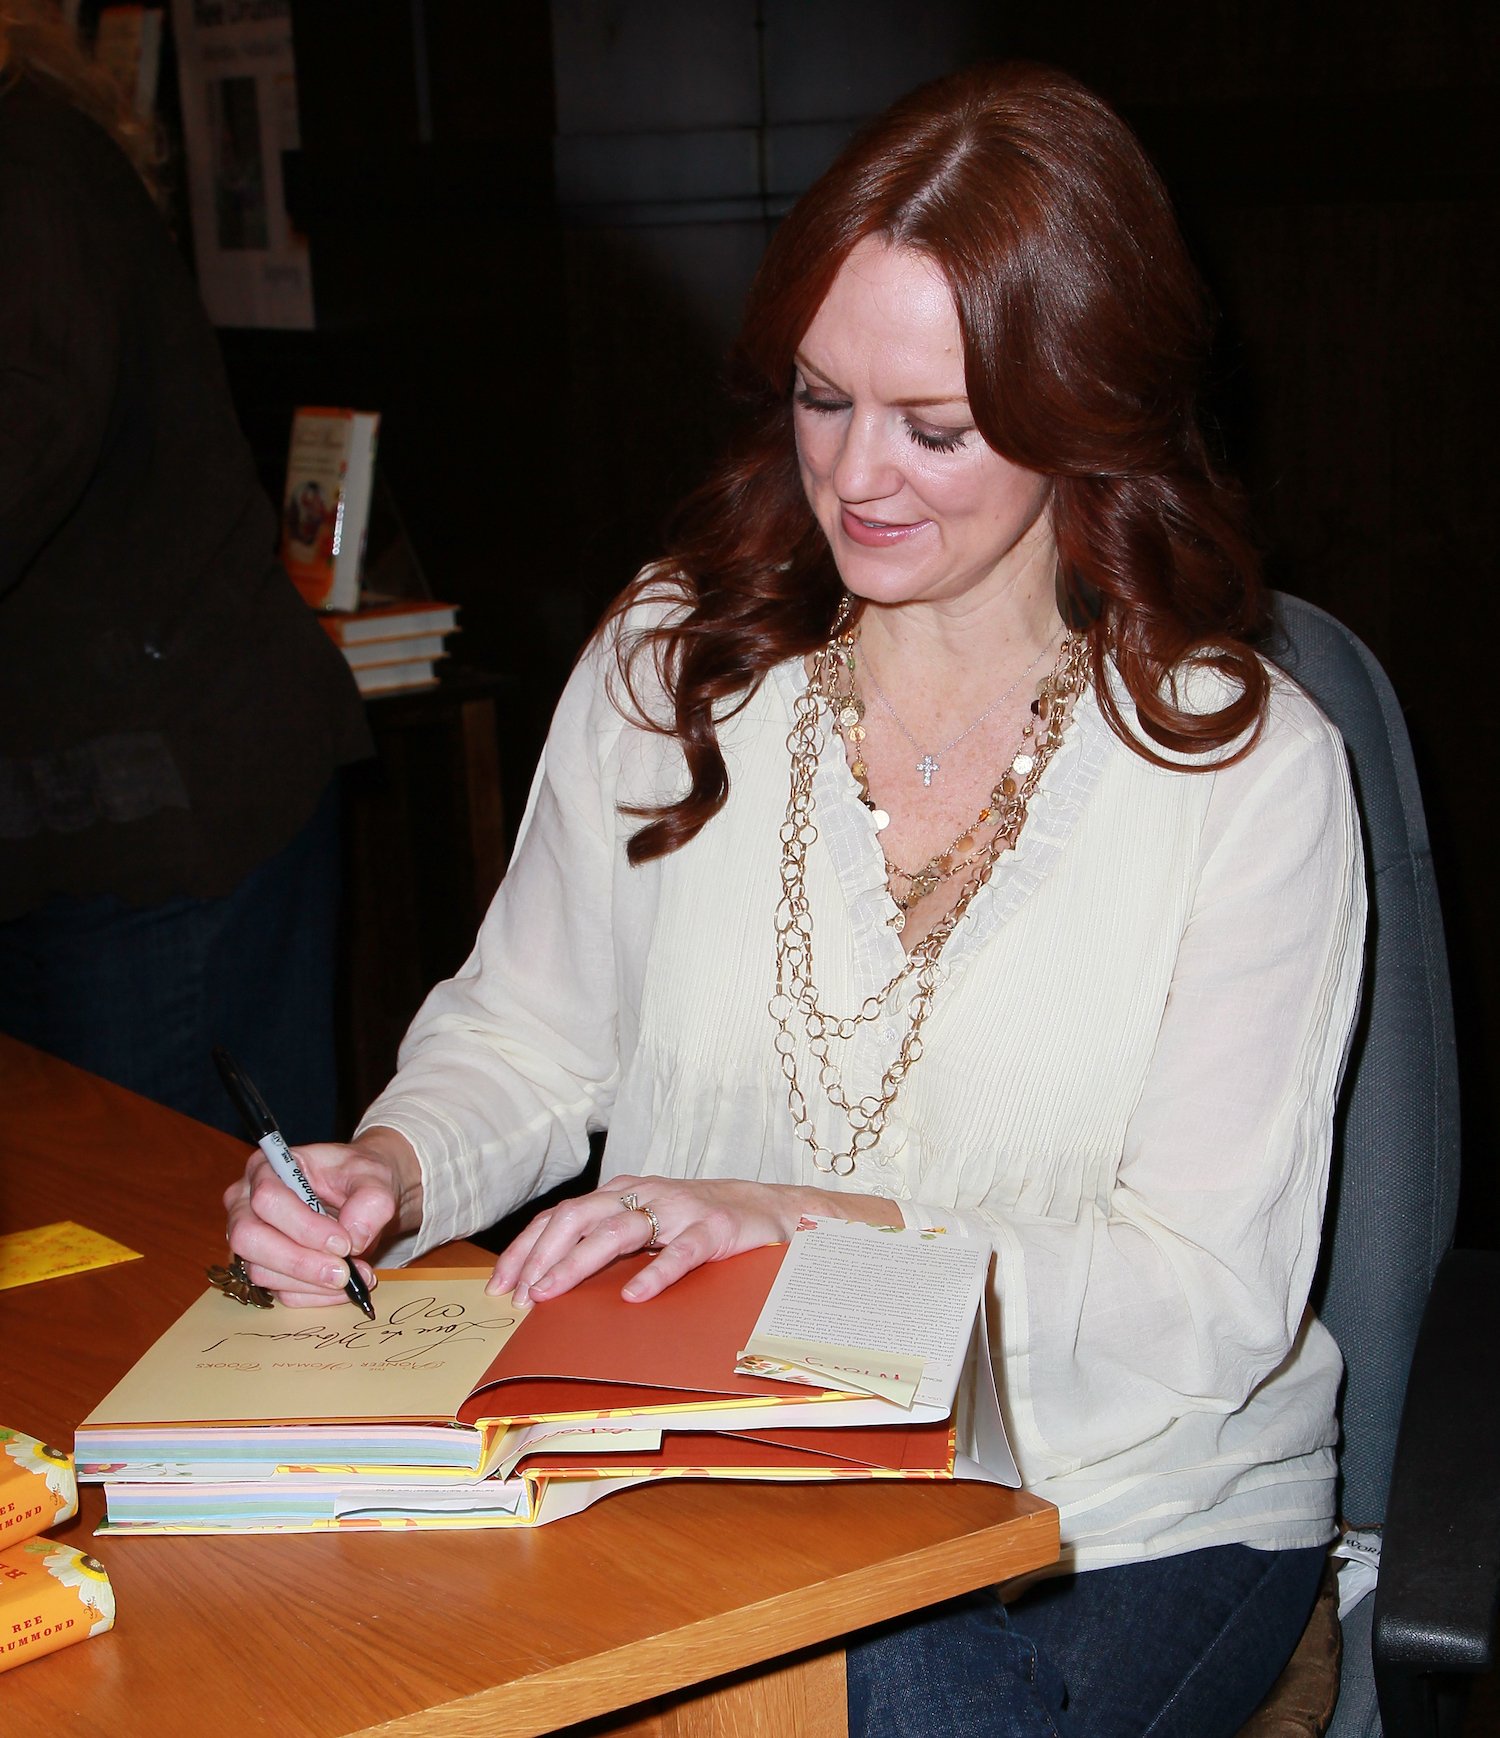 Ree Drummond signing a book in 2011